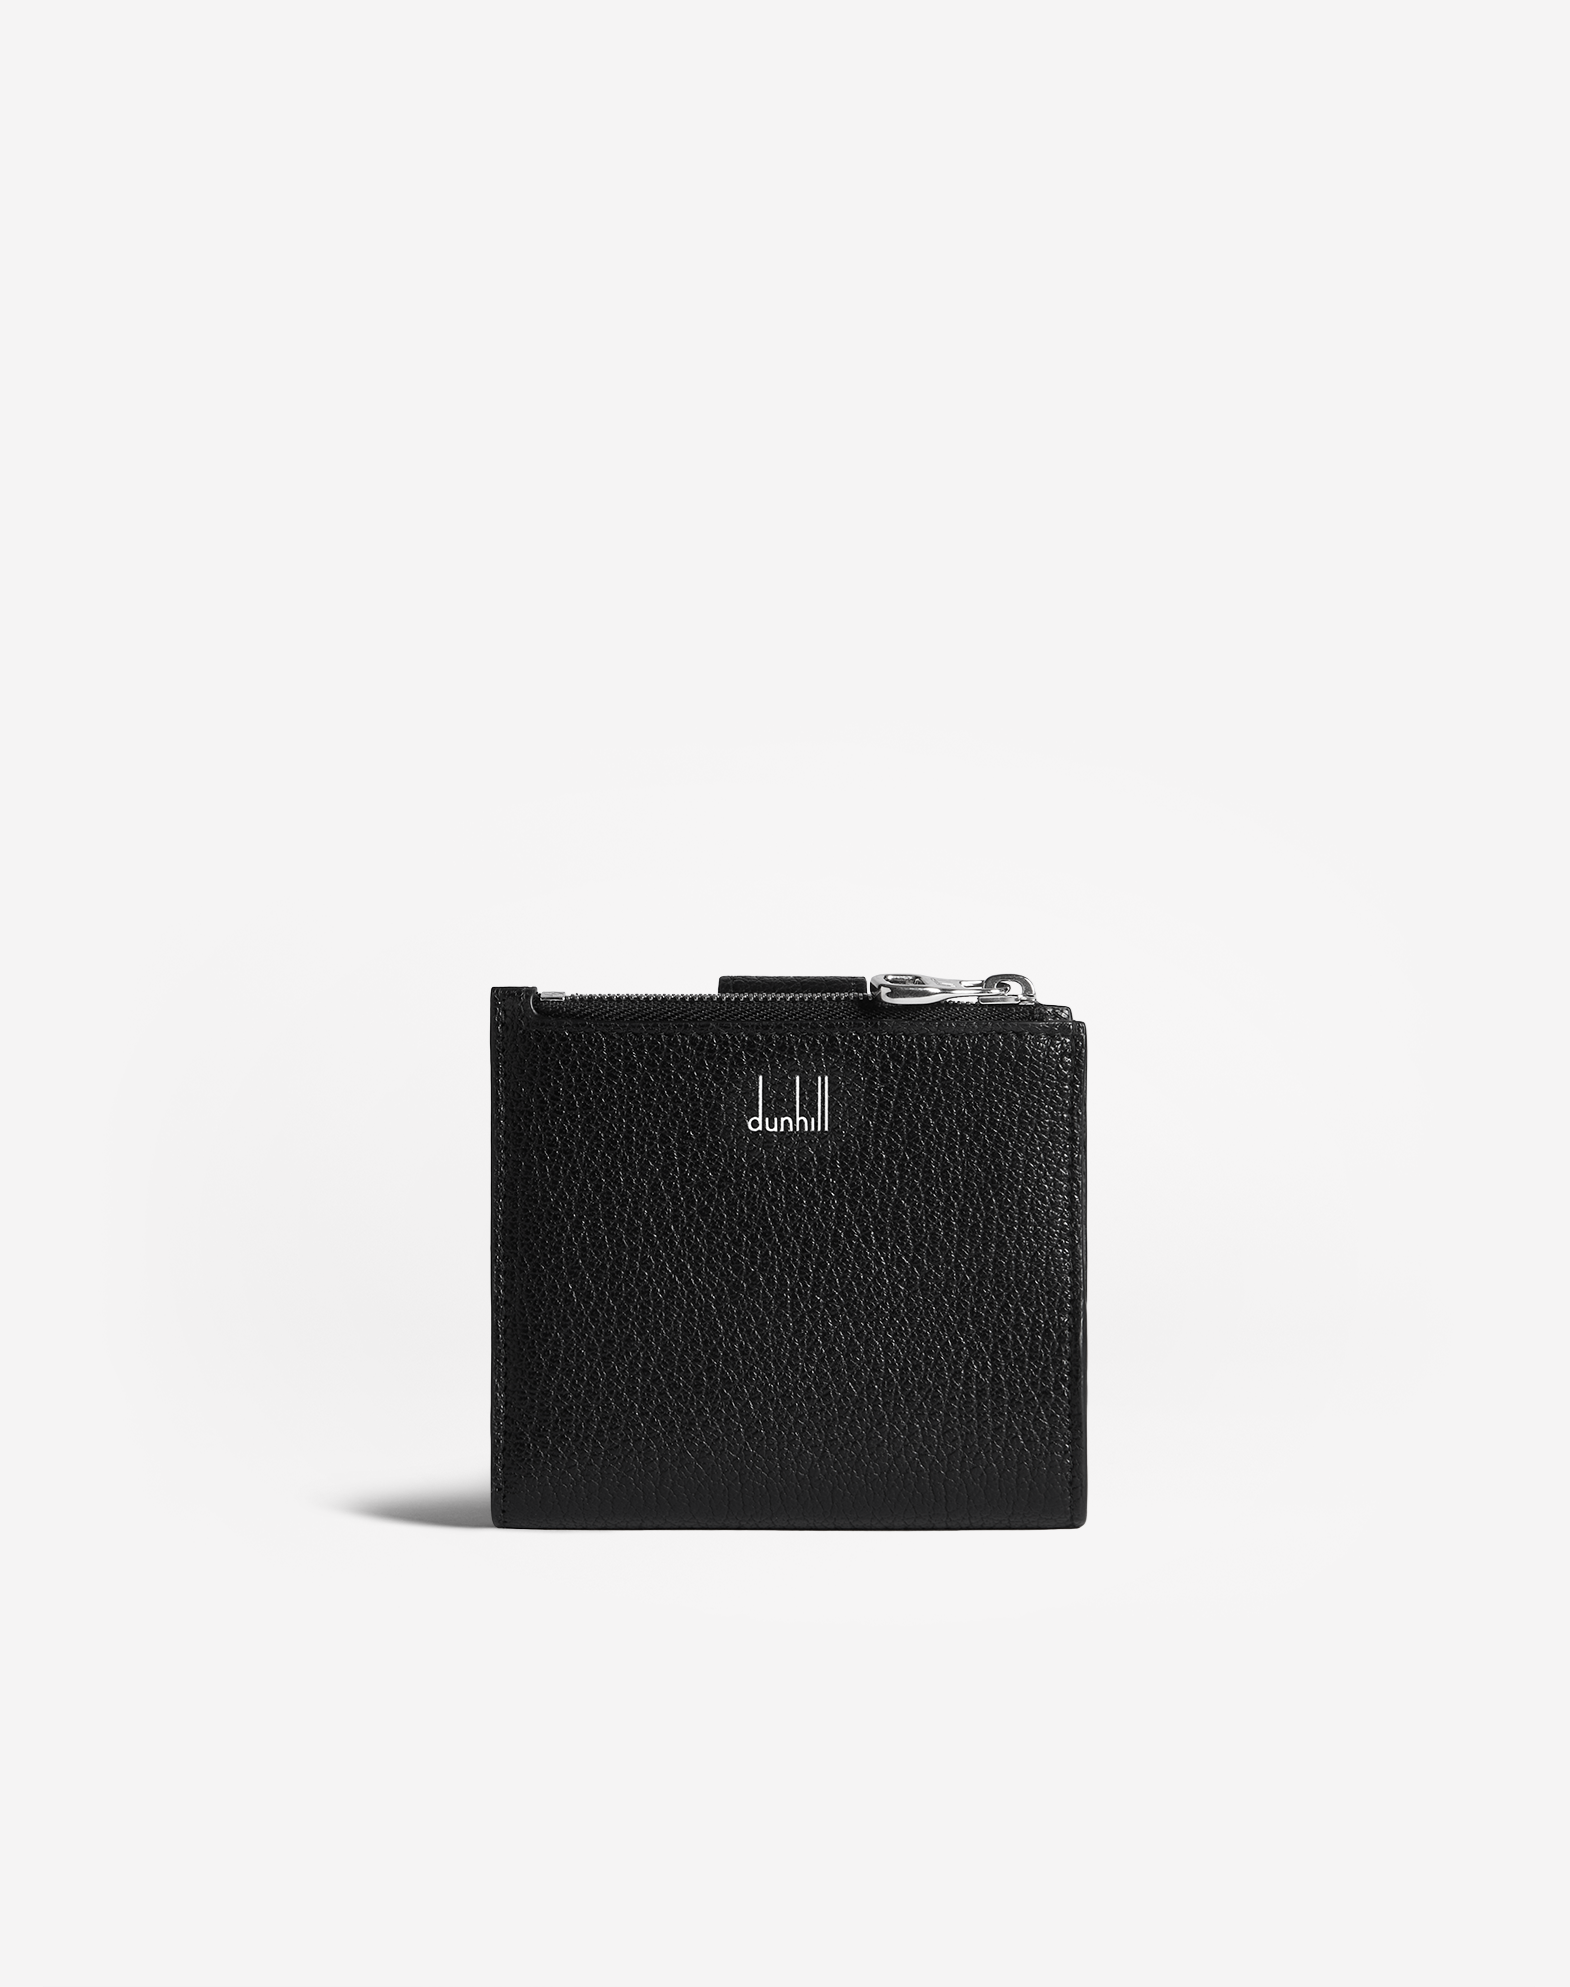 Dunhill Duke Fine Leather Coin Purse Billfold Wallet In Black